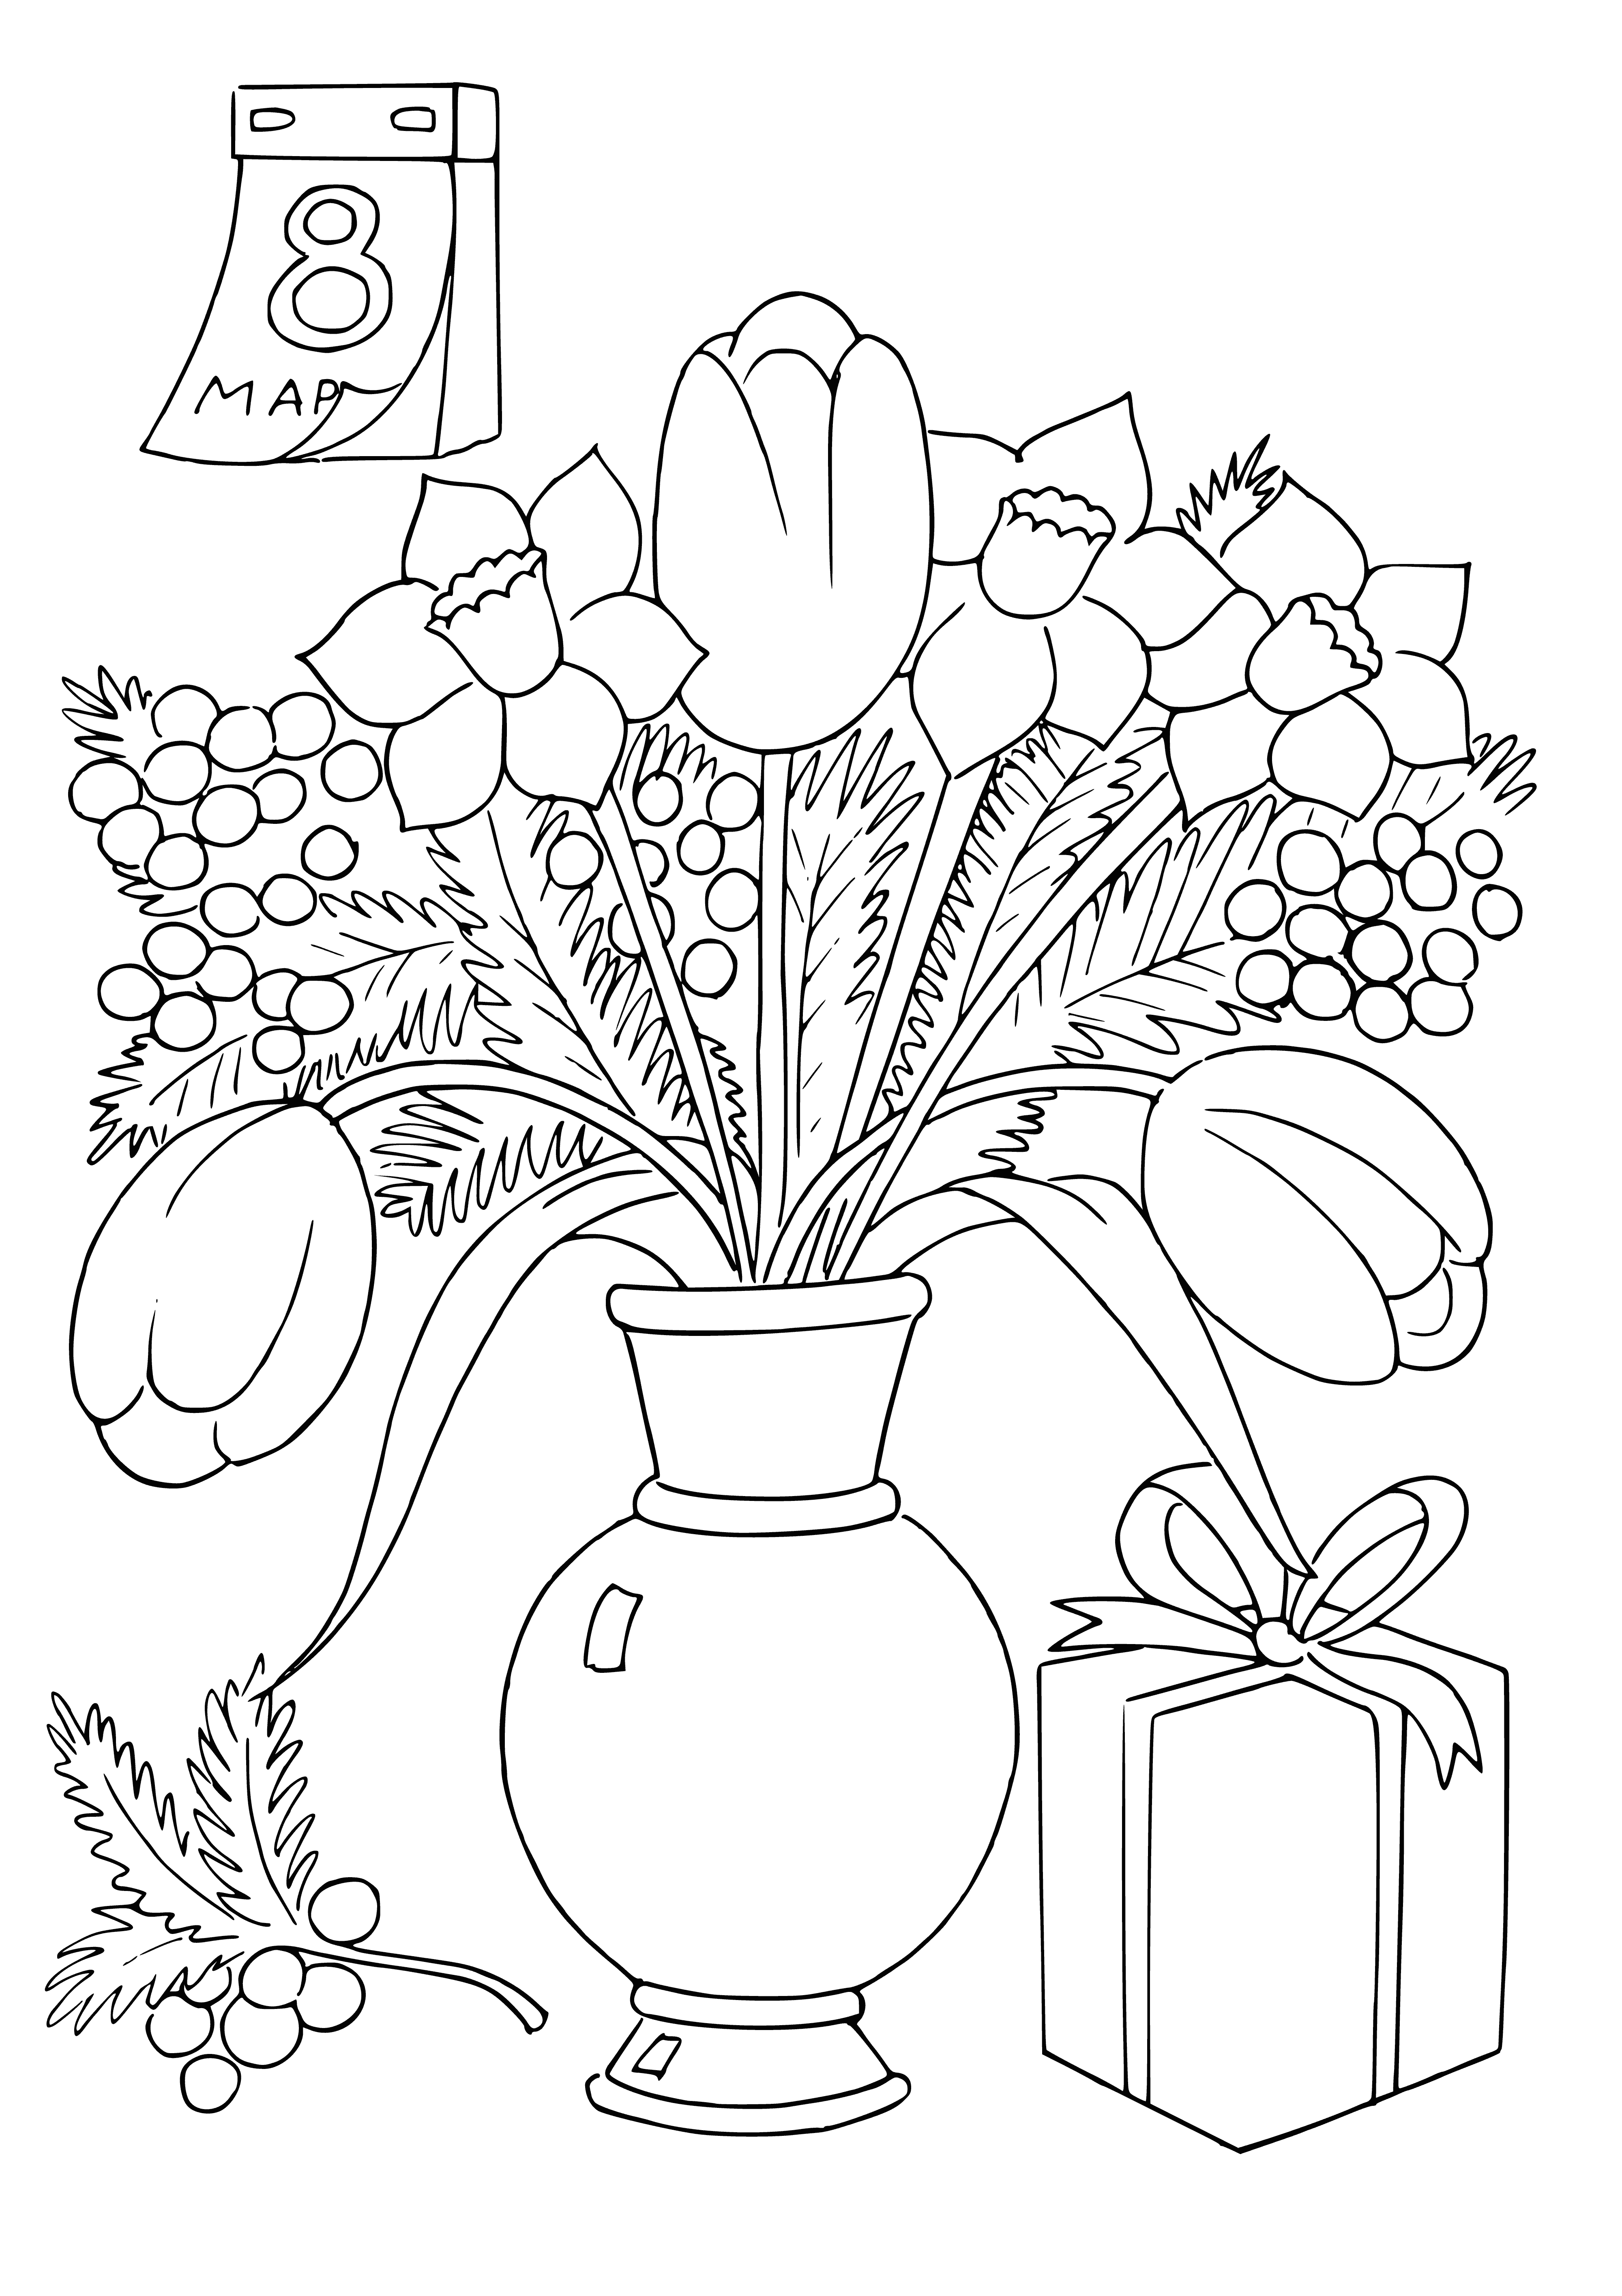 coloring page: Coloring pages: large sun/green tree/blue bird/white cloud (1); large tree/2 pink flowers/yellow sun/blue bird/white cloud (2).